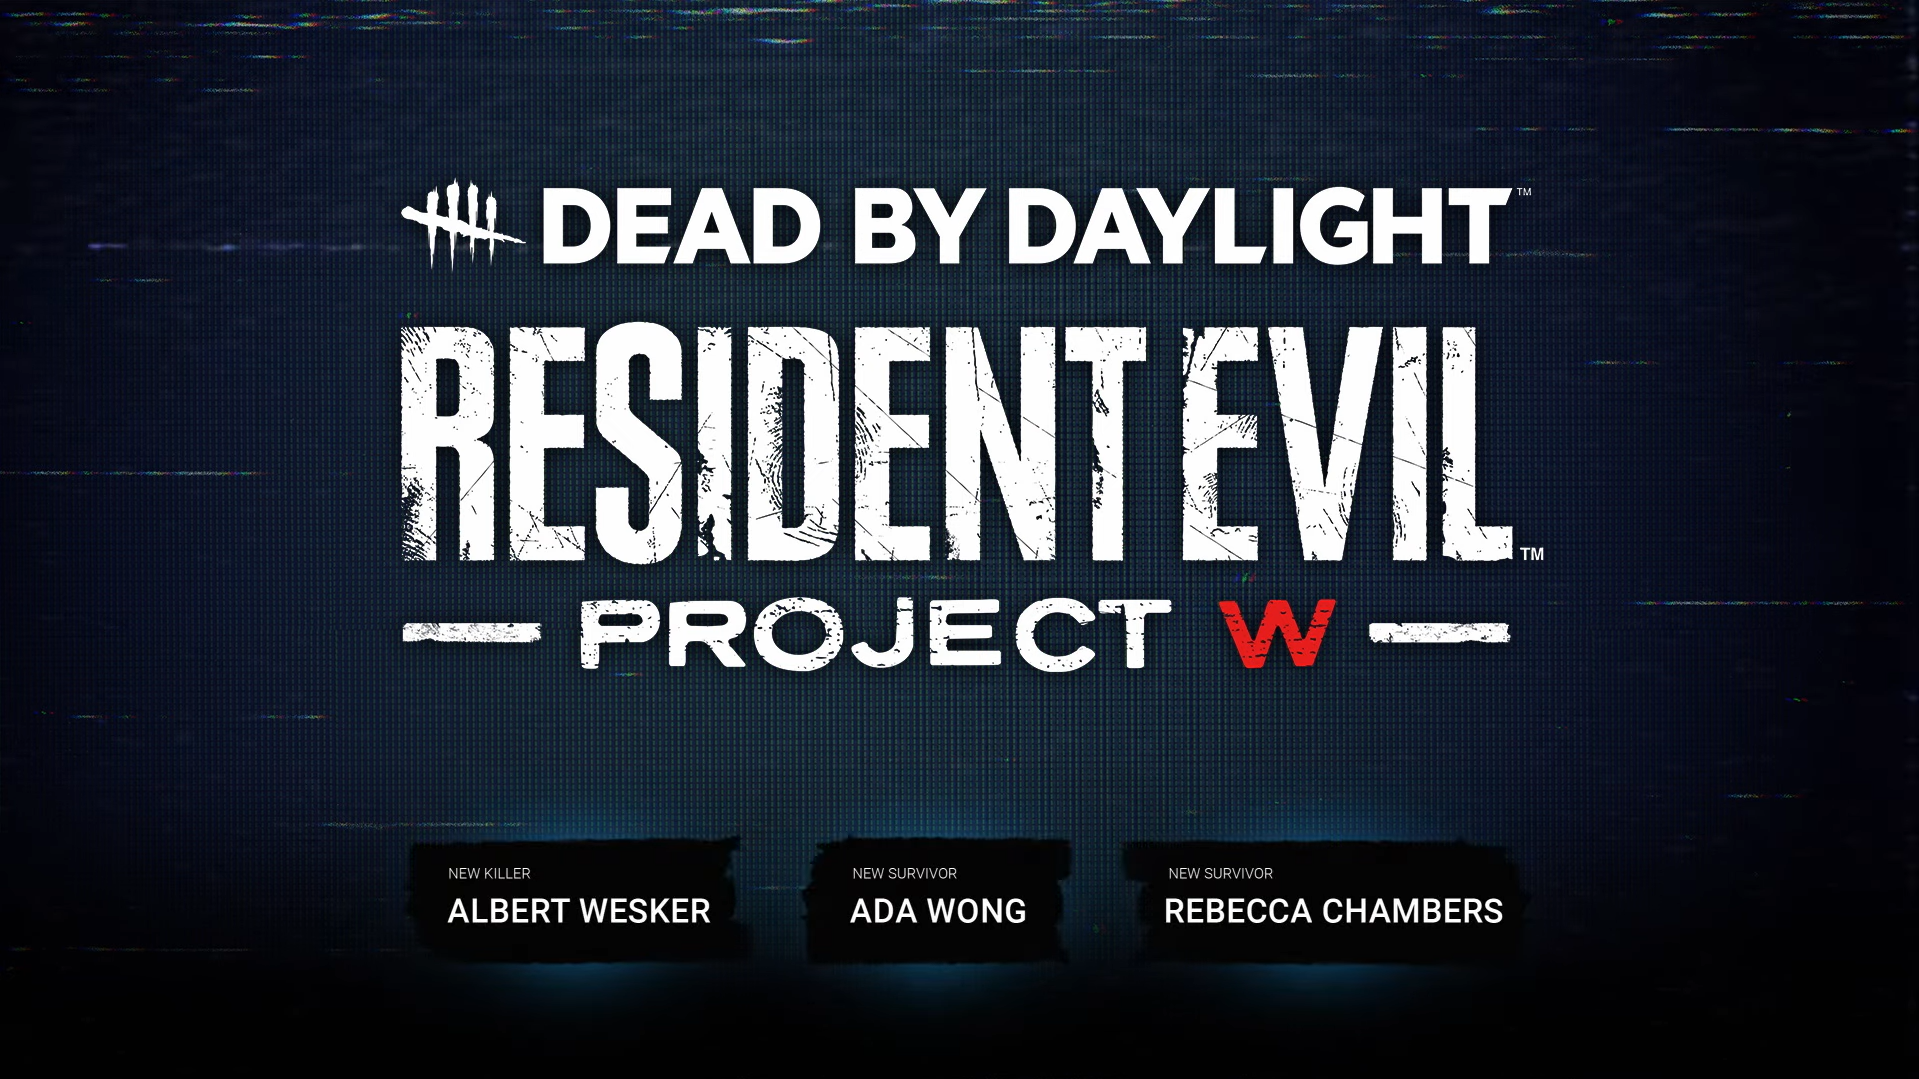 Dead by Daylight - Resident Evil: Project w Chapter. Дбд новая глава Resident Evil 25 глава. Вескер дбд. Dead project